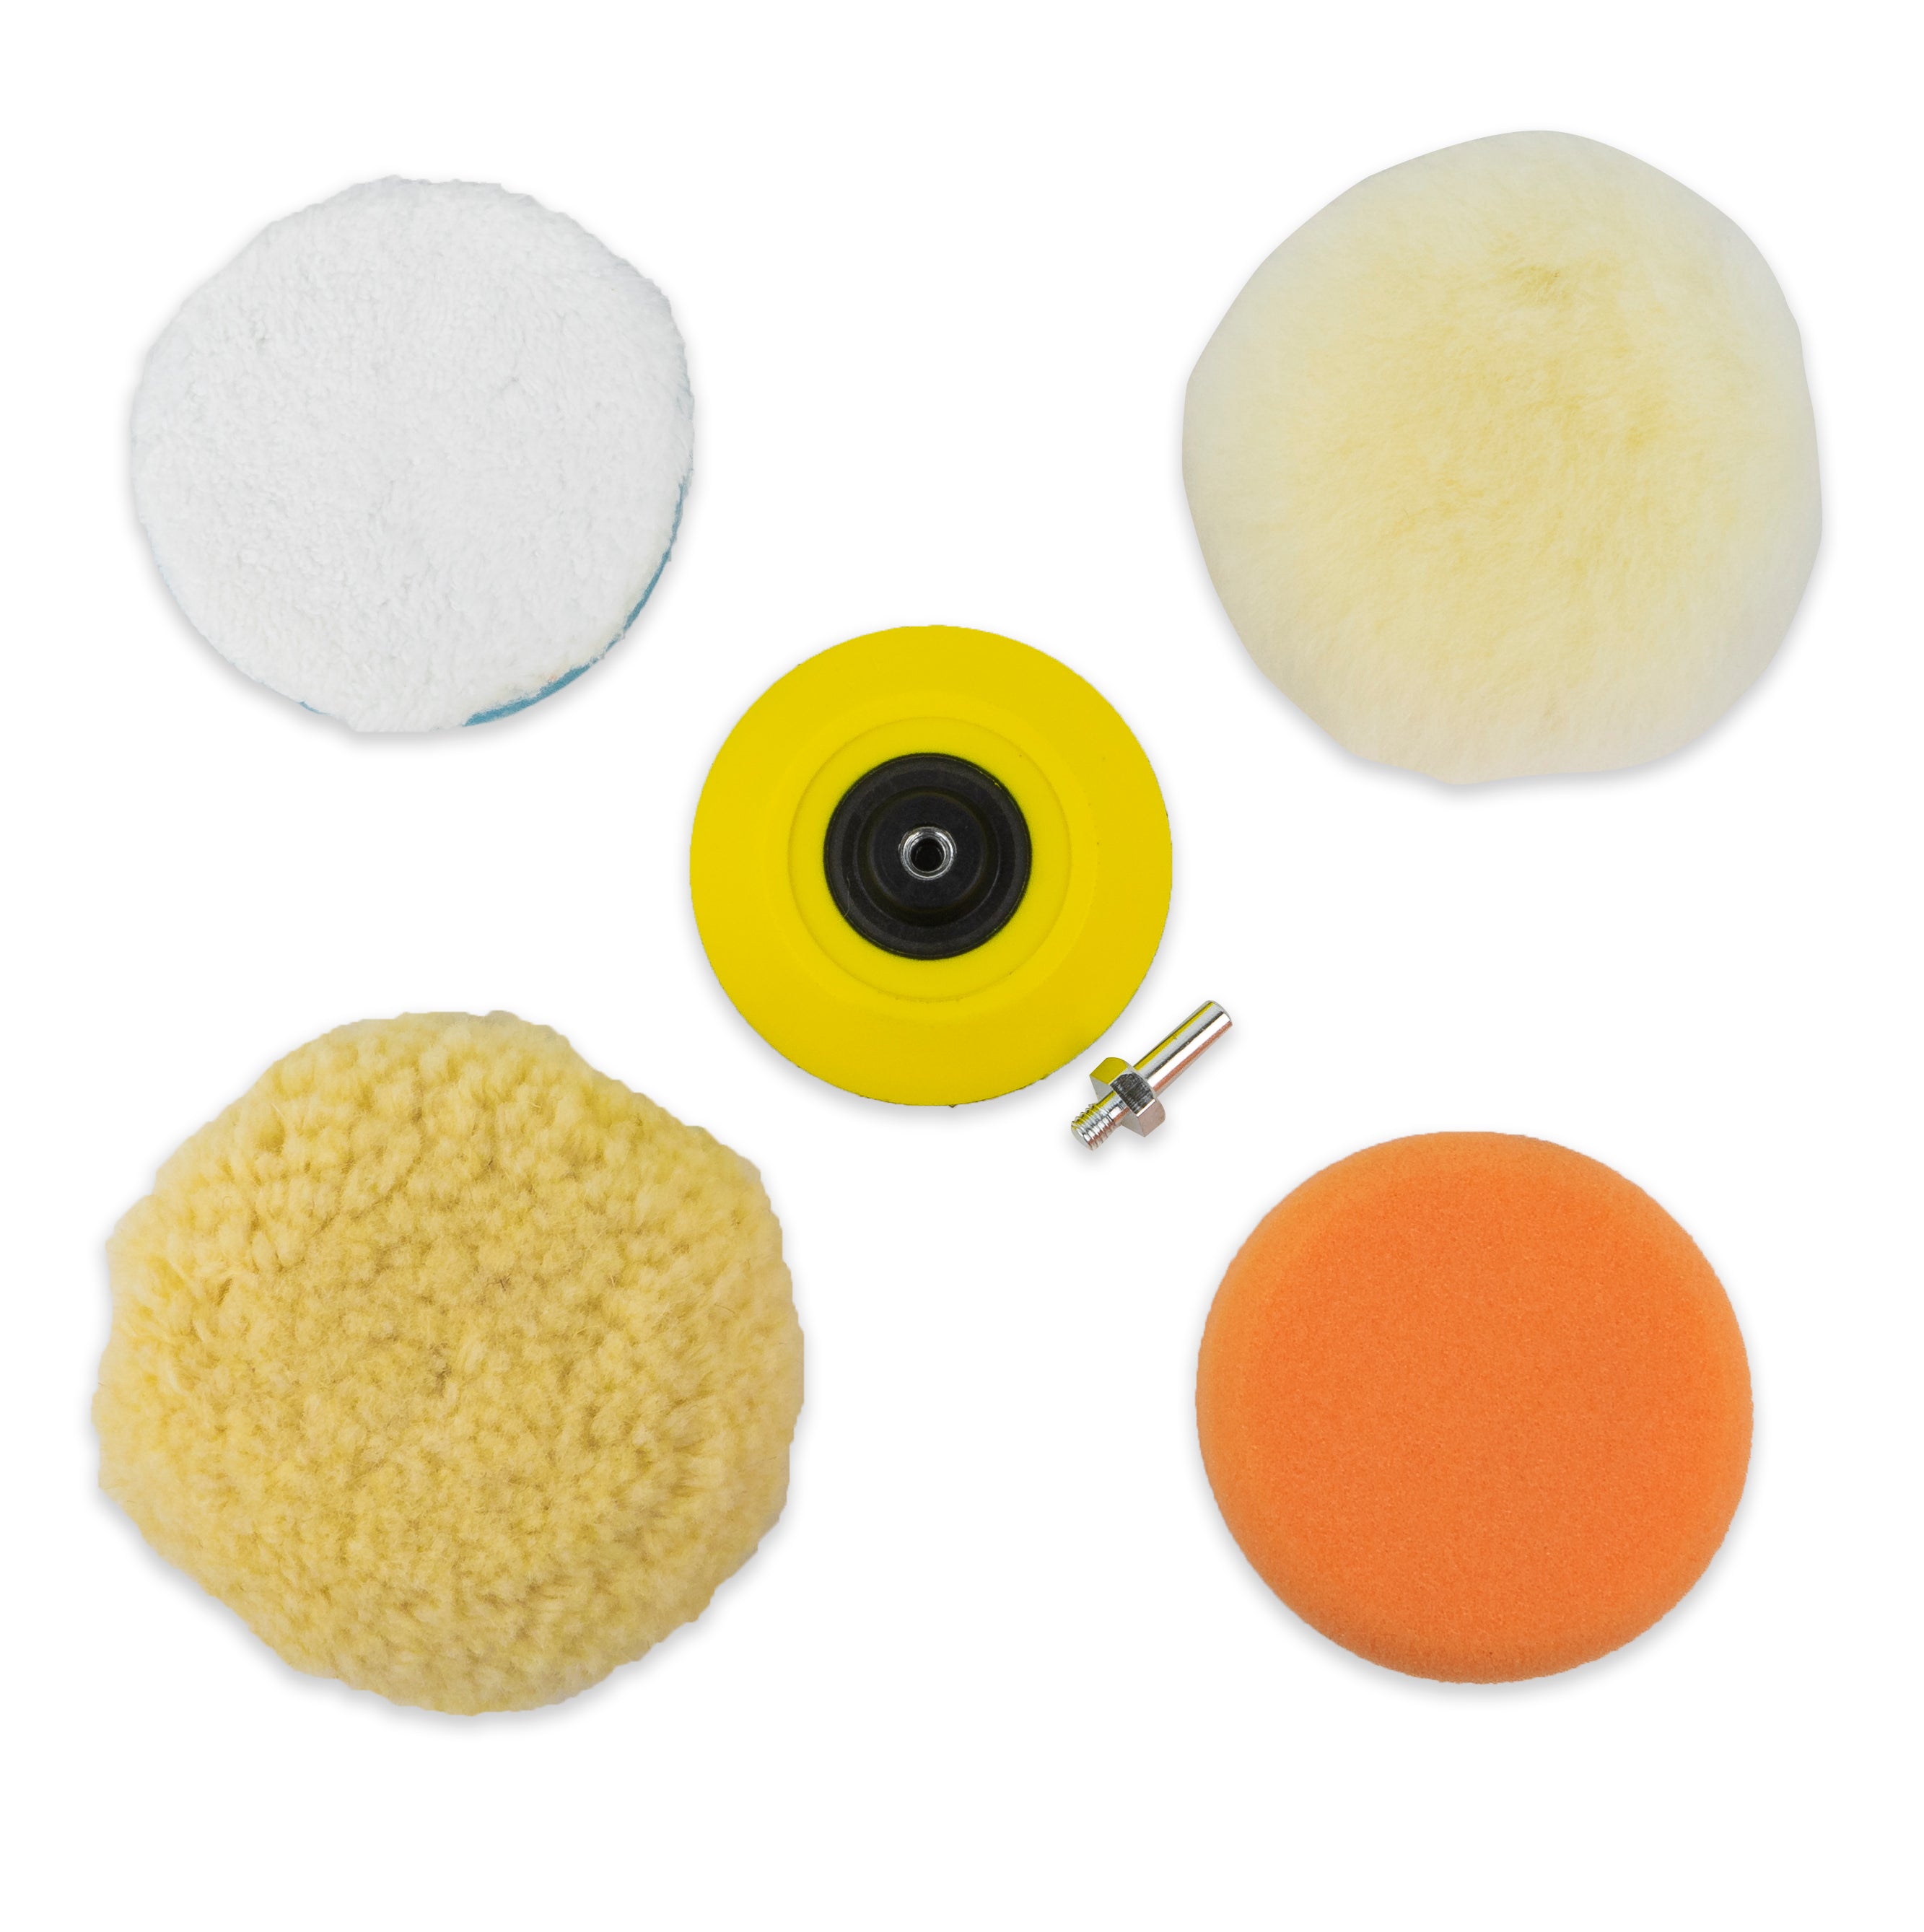 TGR 3" Car Buffing & Polishing Pad Kit - Turn Your Drill into Power Polisher - Foam & Wool Pads - Hook & Loop Backing Pad with Adapter - Tool Guy Republic